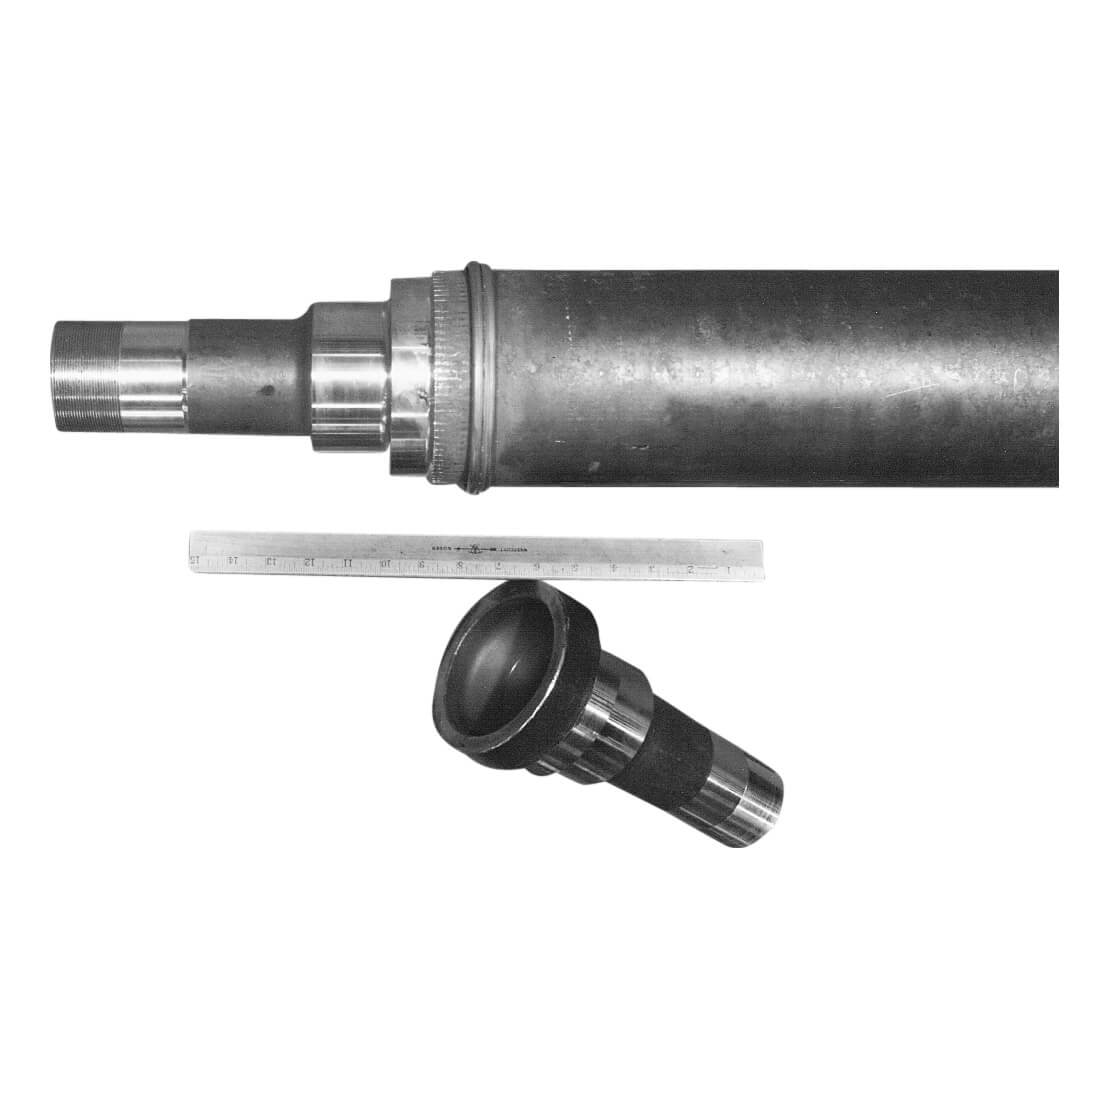 Forged wheel spindles joined to 5 inches (127 mm) diameter - 5 inches (12.7 mm) wall tubing to produce trailer axles.